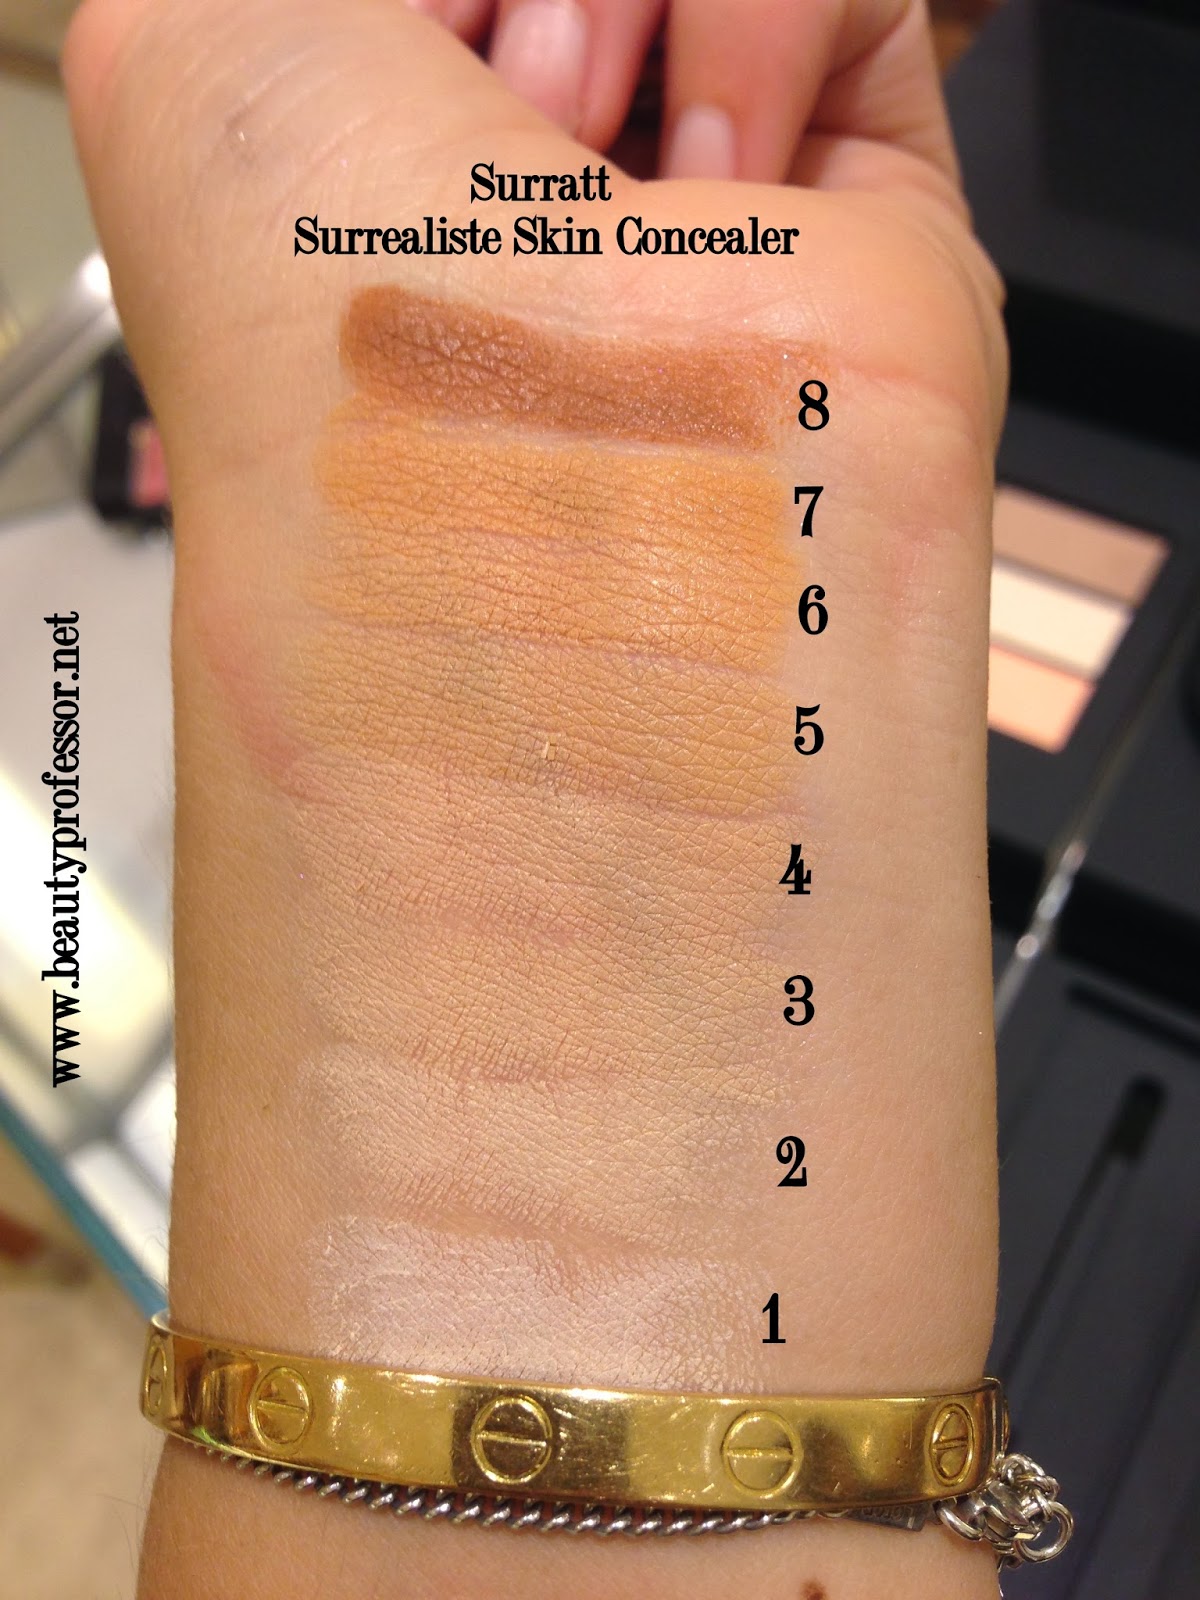 Surratt Video Overview and an Insane Amount of Swatches | Beauty Professor | Bloglovin'